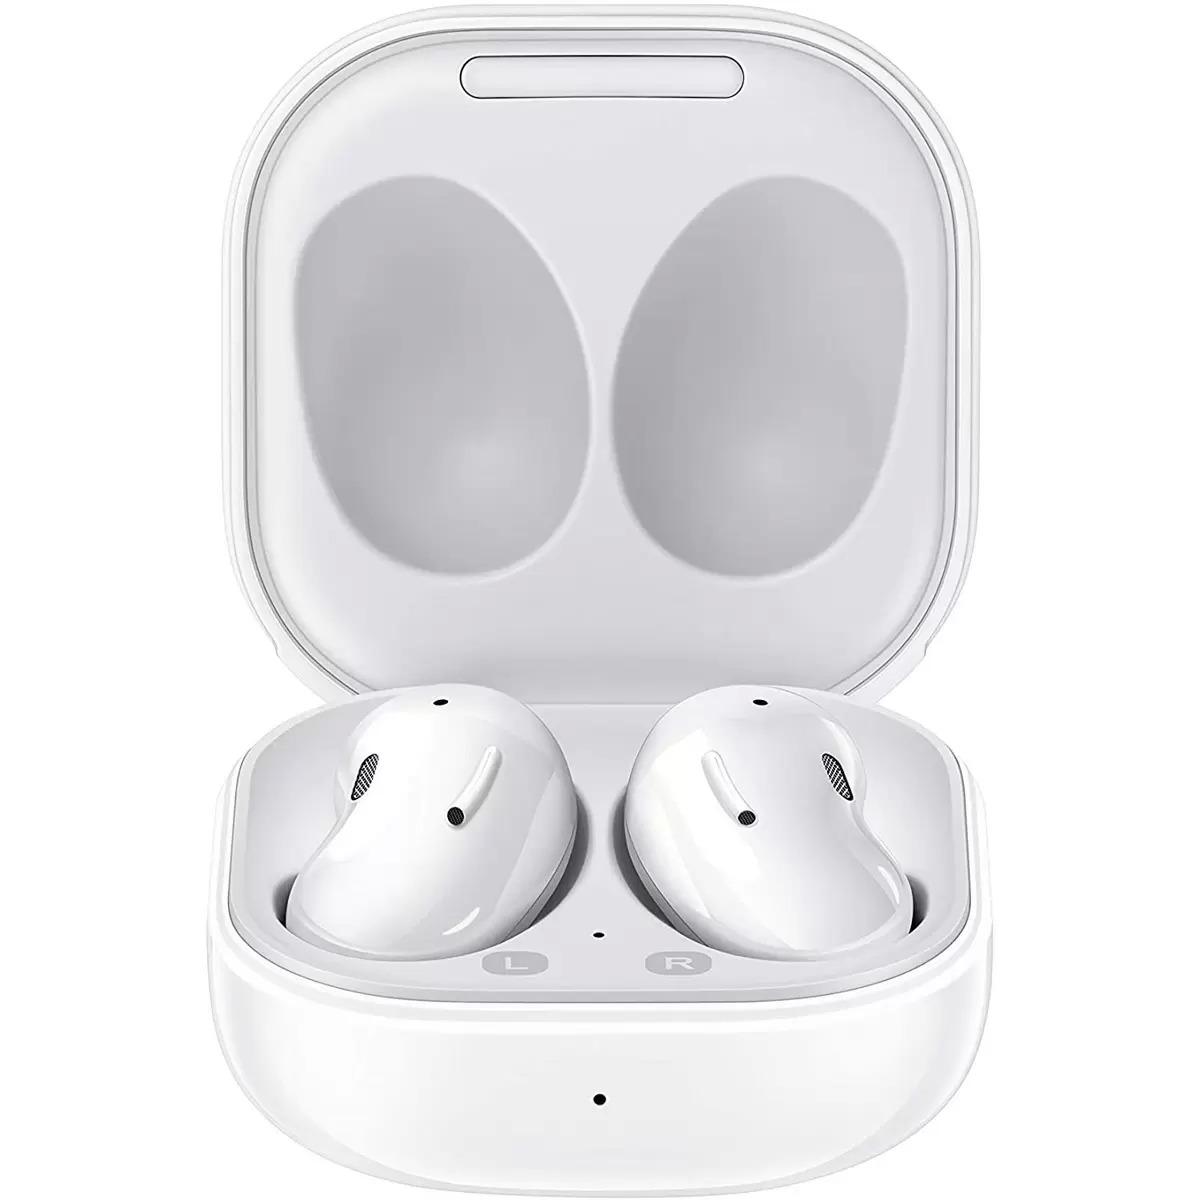 Samsung Galaxy Buds Live Bluetooth Earbuds for $89.99 Shipped